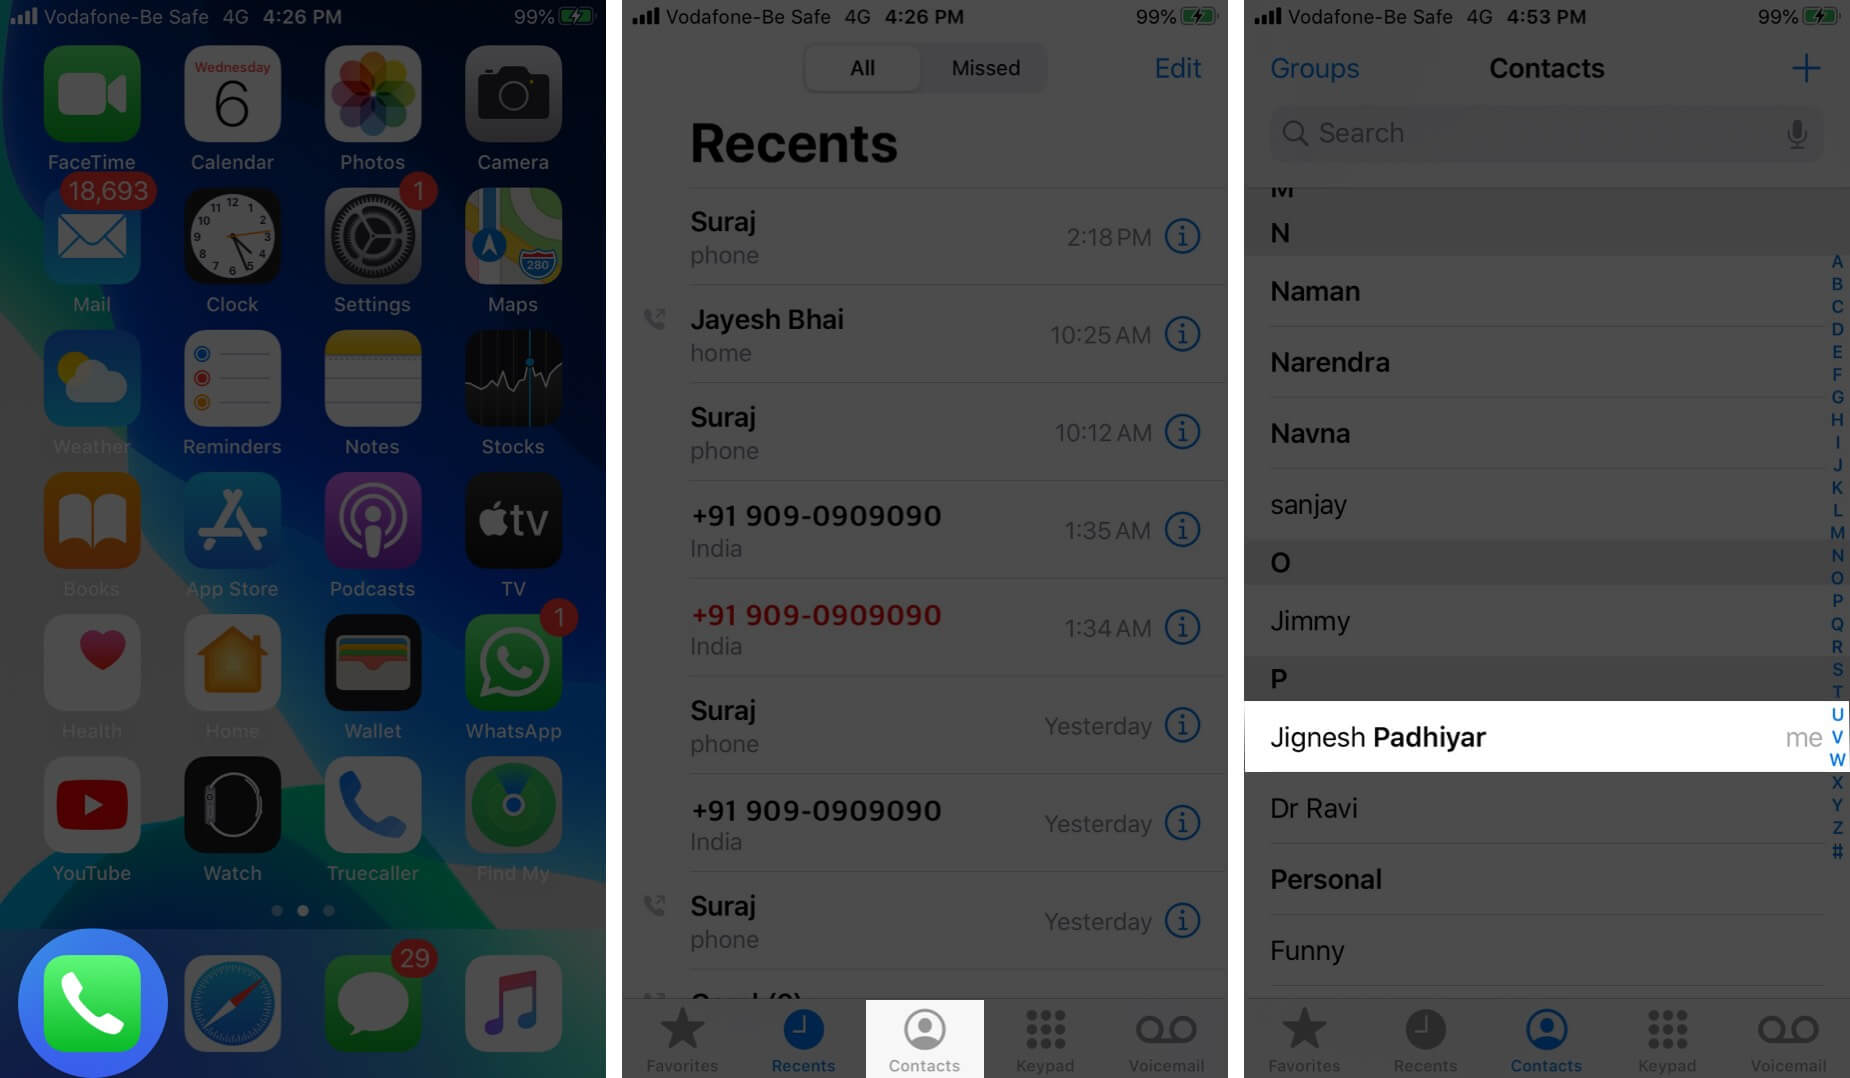 Open Phone App Tap on Contacts Tab and Select Contact on iPhone